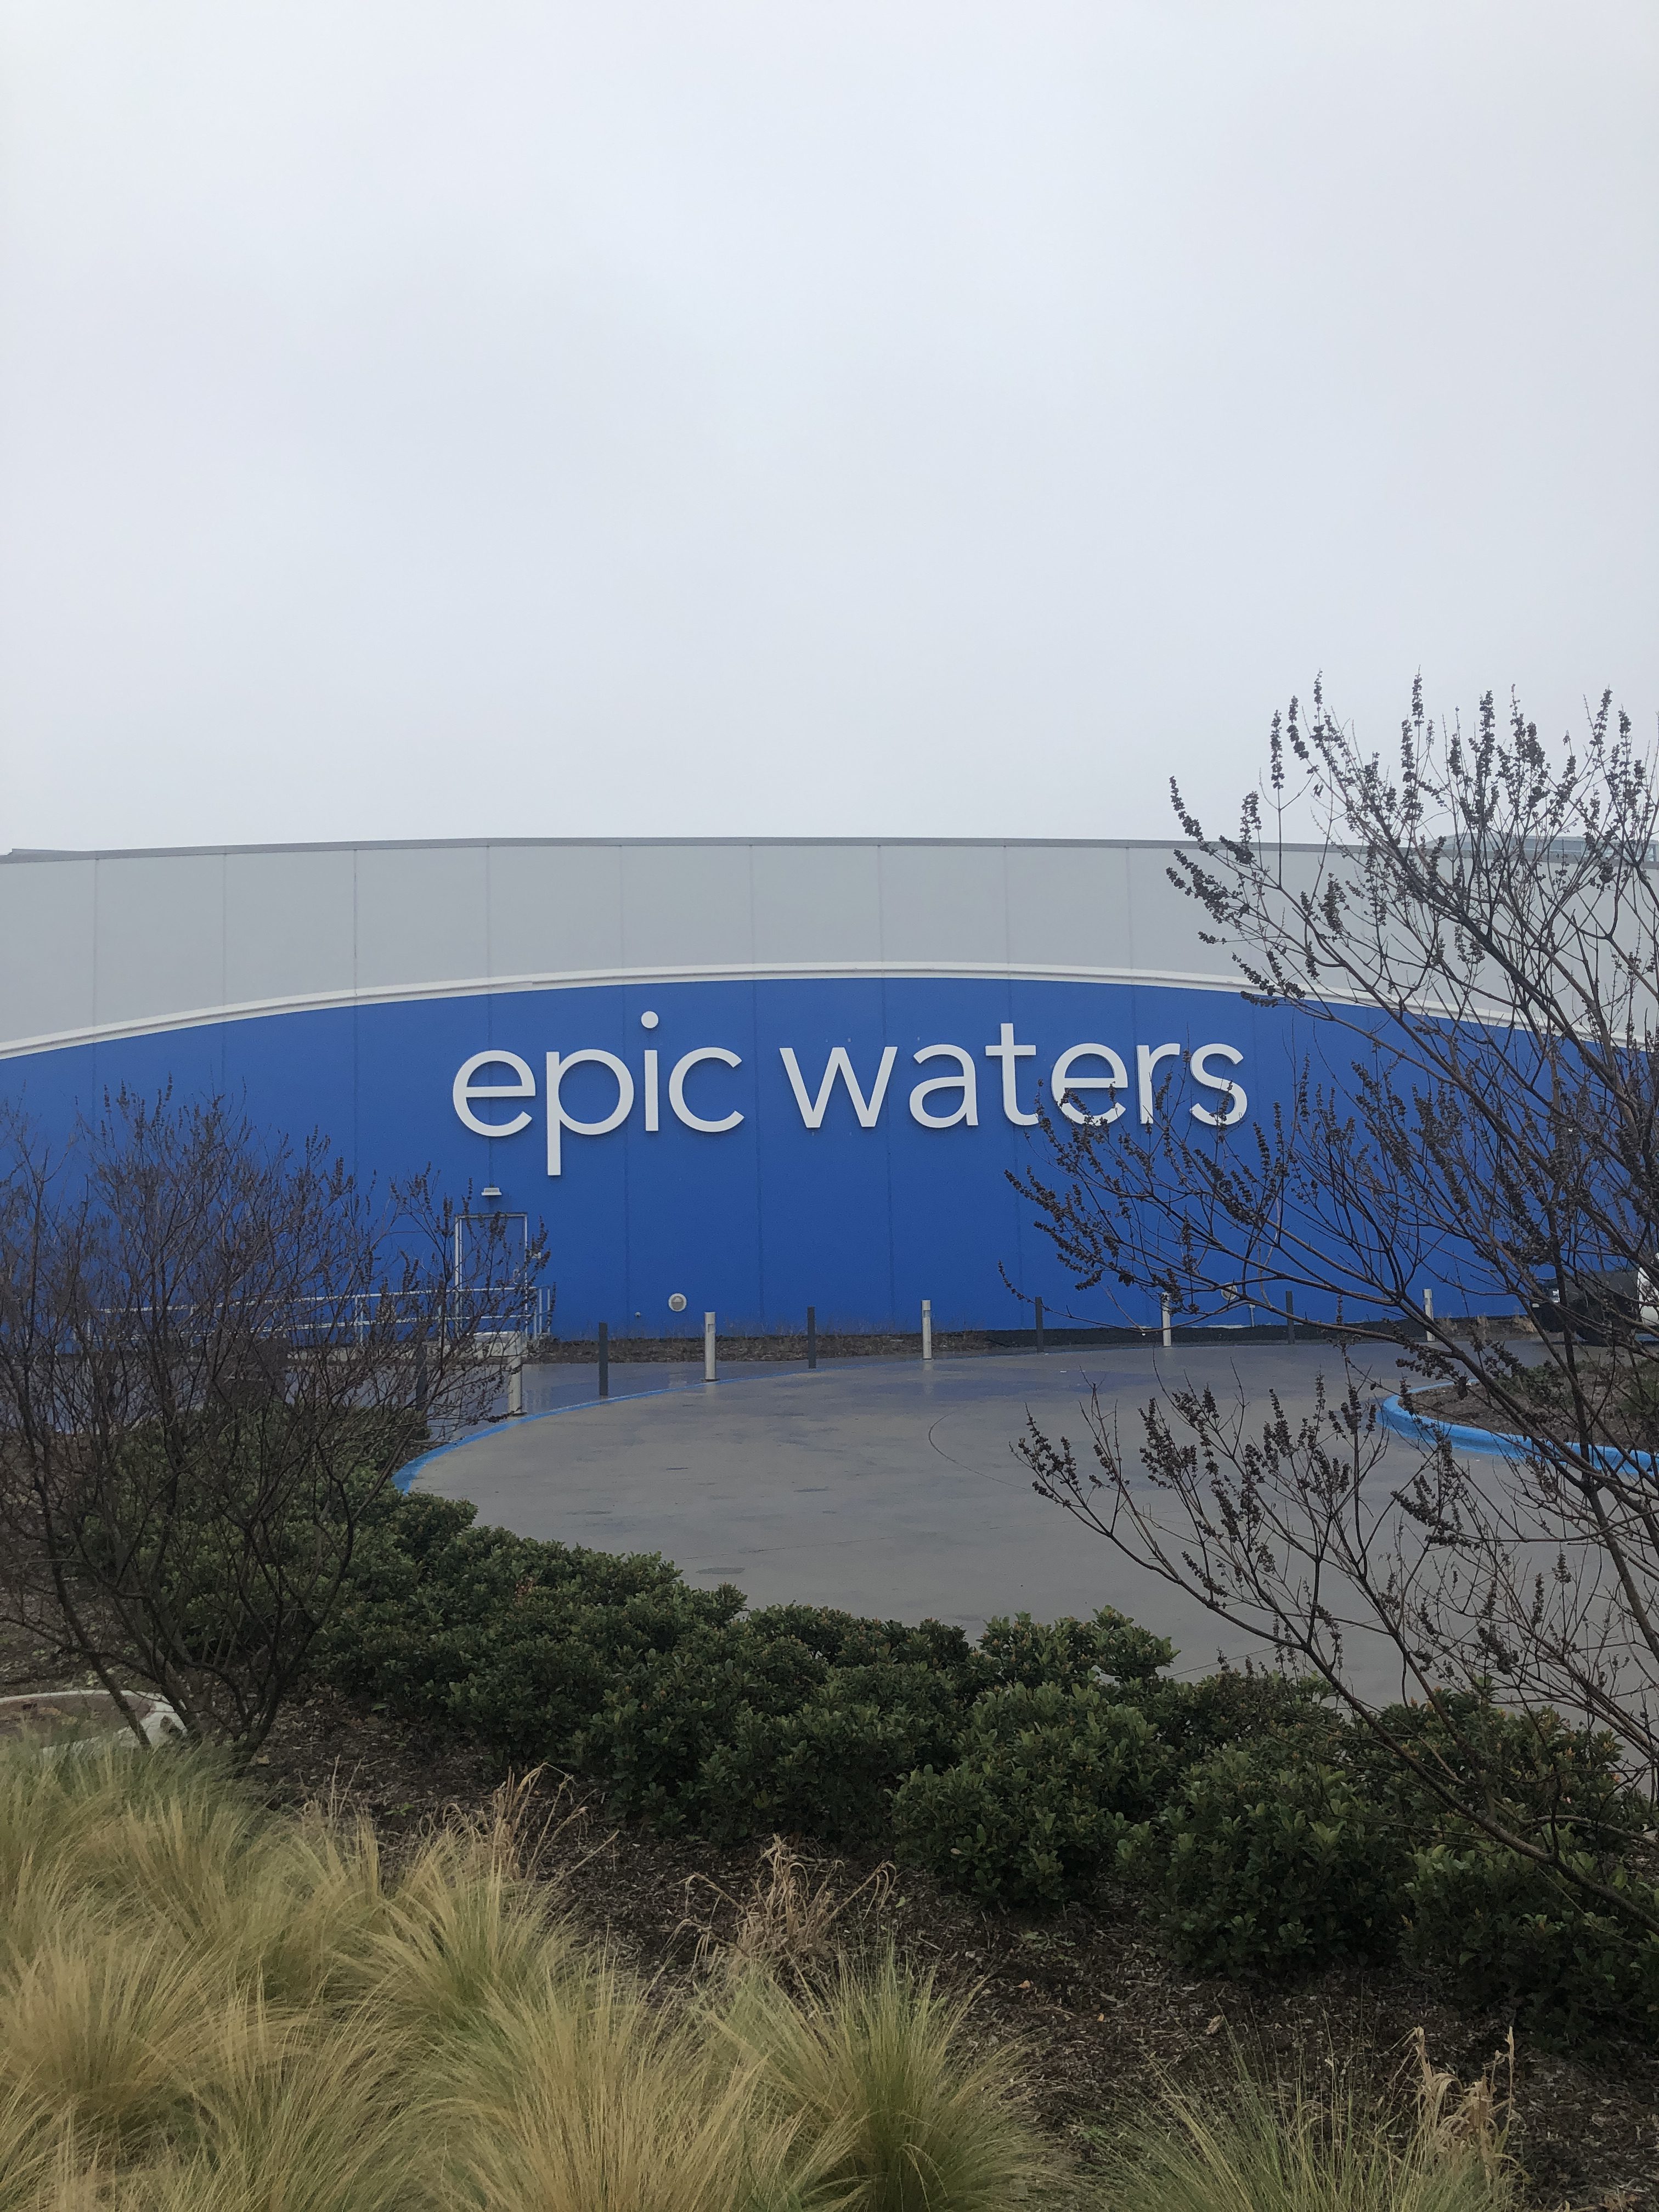 epic waters